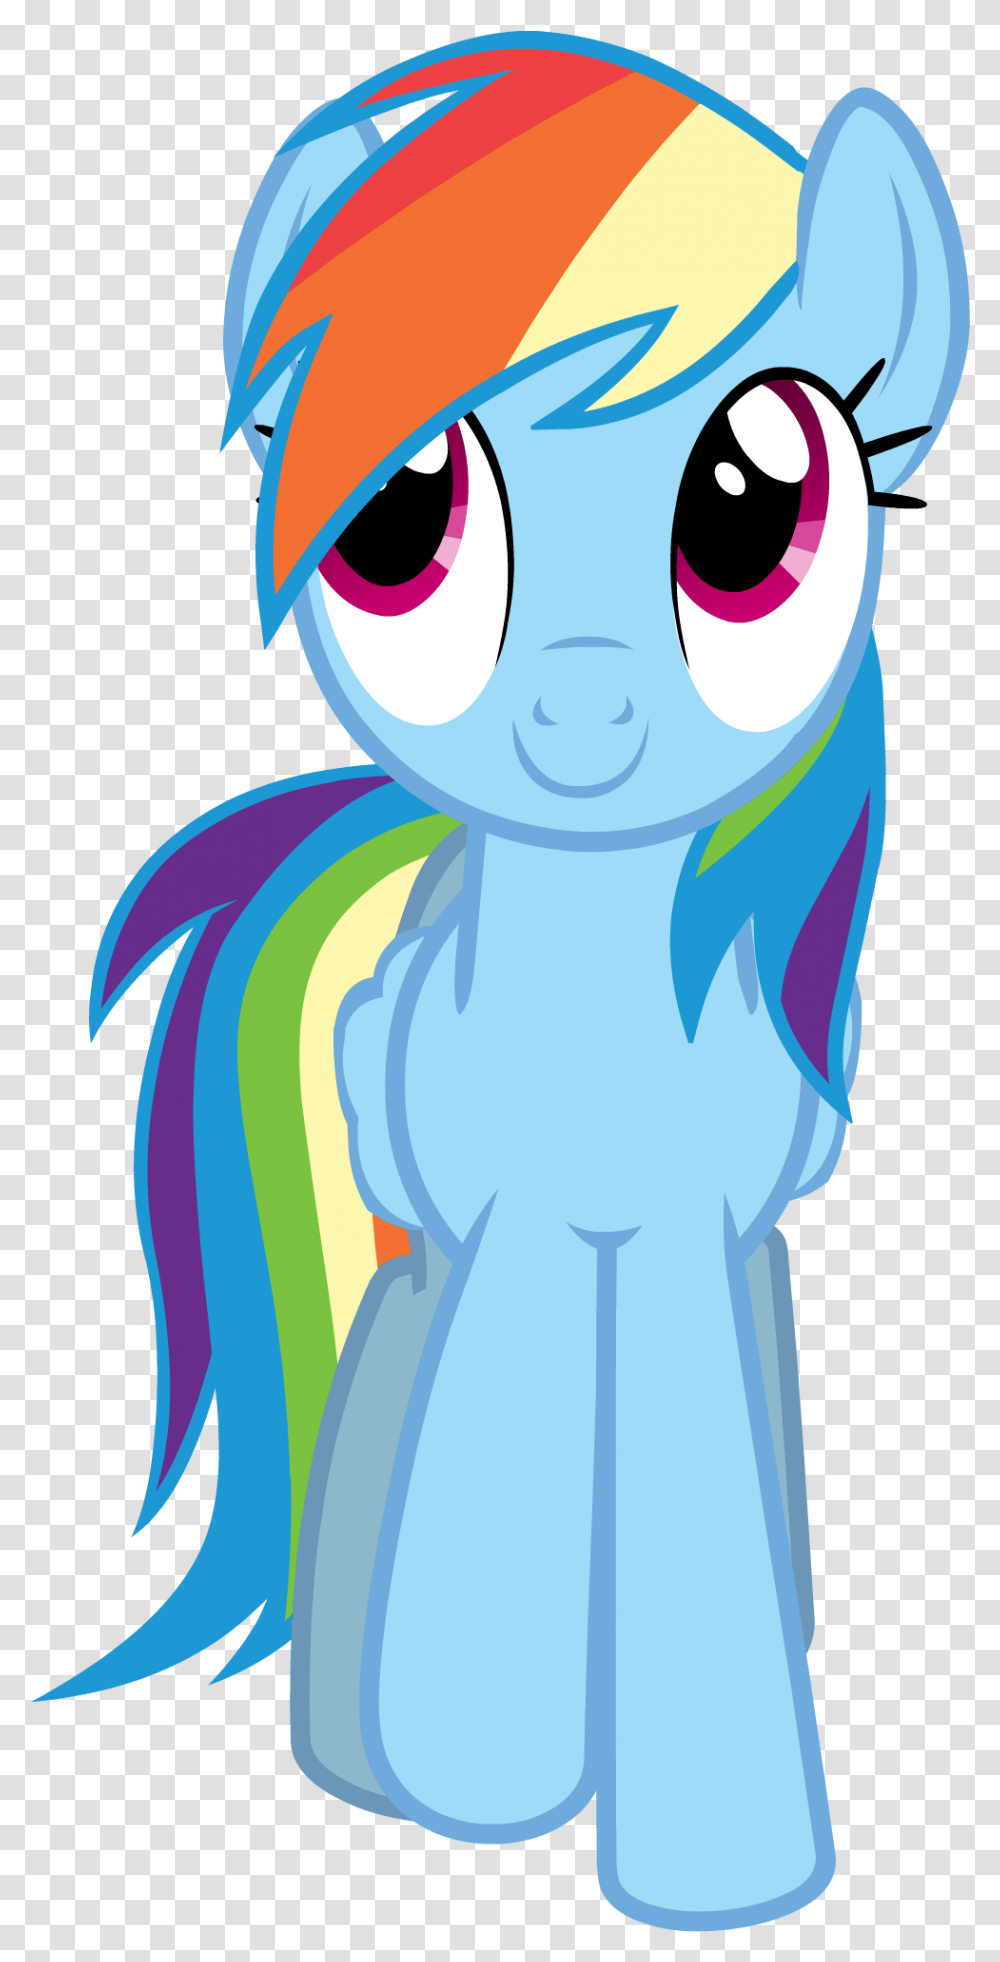 Download Pinkie Pie S E Mlp My Friendship Is Magic Rainbow Dash, Modern Art, Drawing Transparent Png